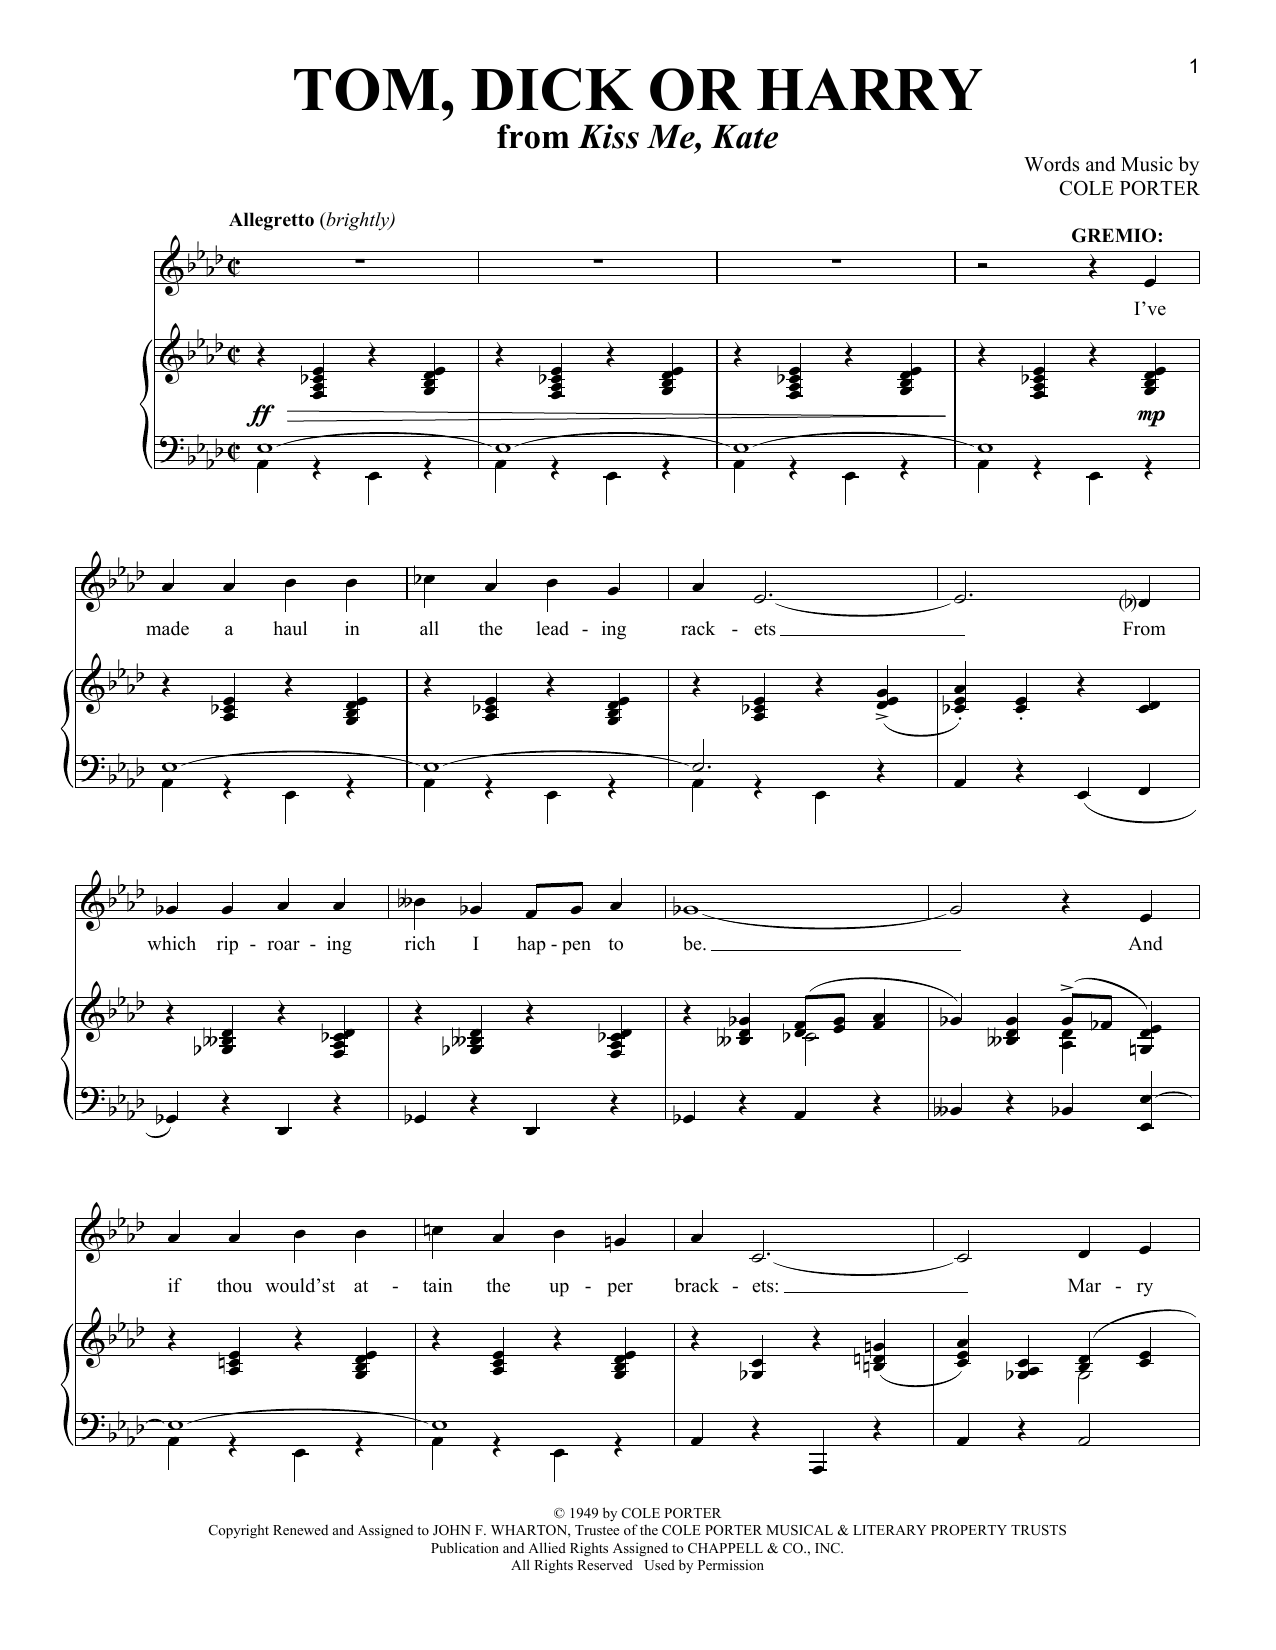 Download Cole Porter Tom, Dick Or Harry (from Kiss Me, Kate) Sheet Music